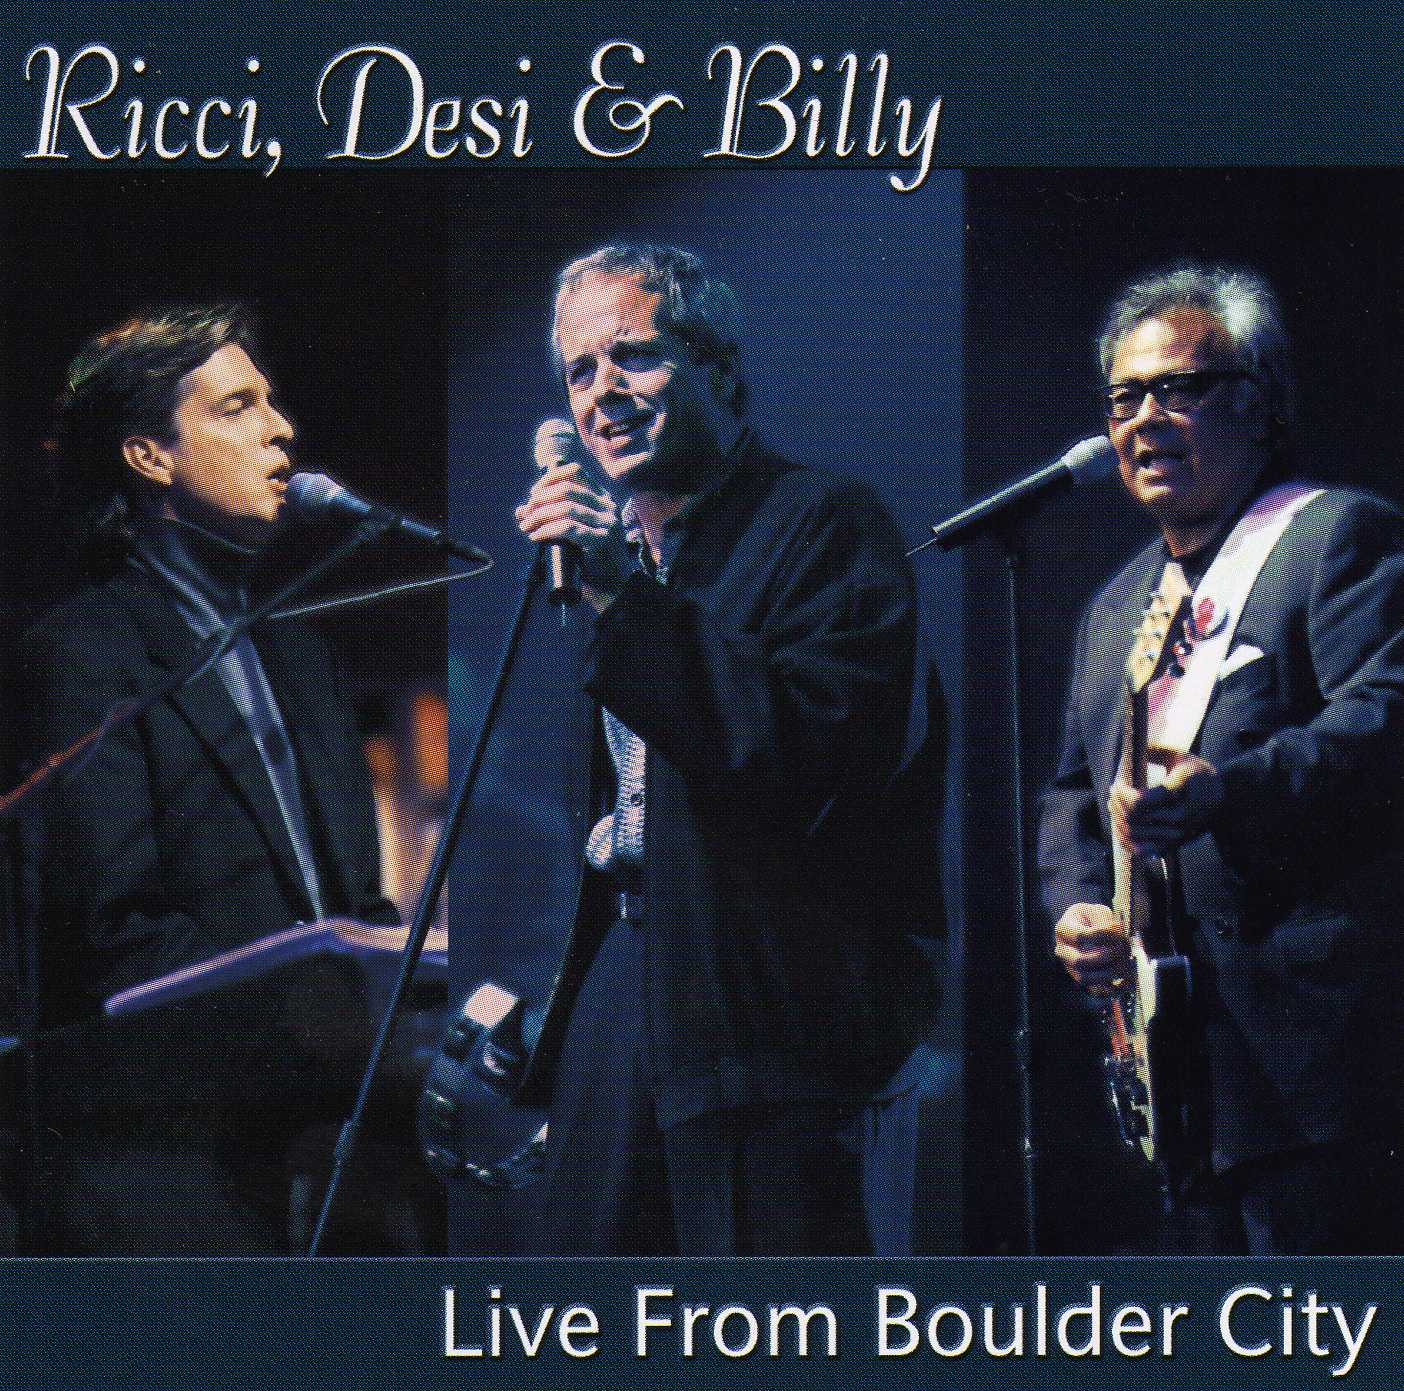 Ricci, Desi & Billy (a reconfiguration of Dino, Desi & Billy) performed at Desi's Theatre and in Las Vegas at the MGM. A CD is available at themagictutu.com